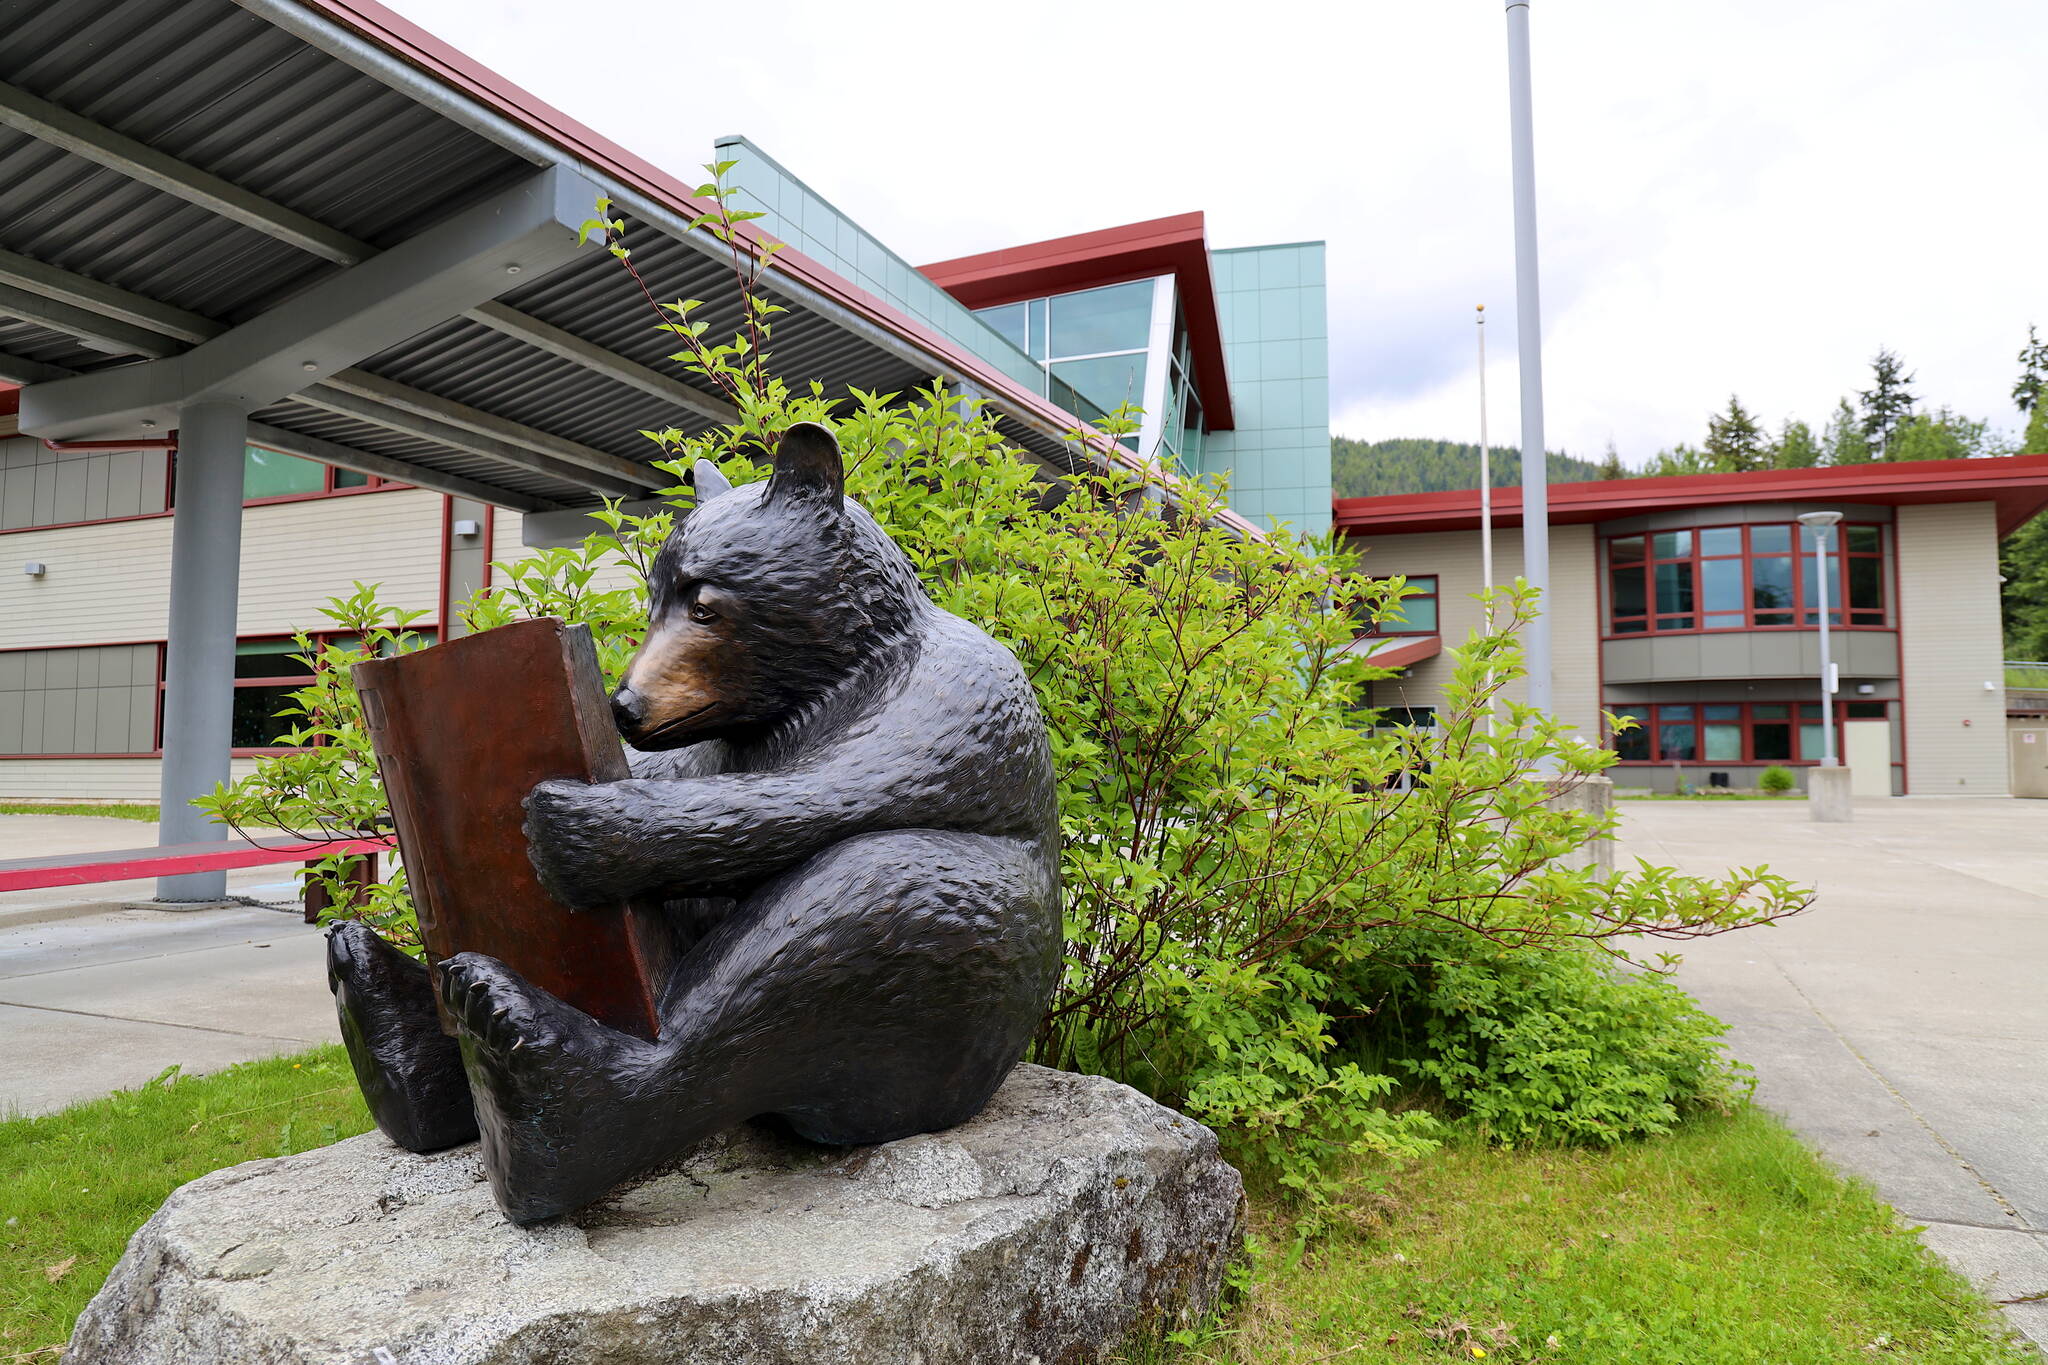 A sculpture of a bear reading a book is seen in front of Auke Bay Elementary School on Wednesday. (Clarise Larson / Juneau Empire)